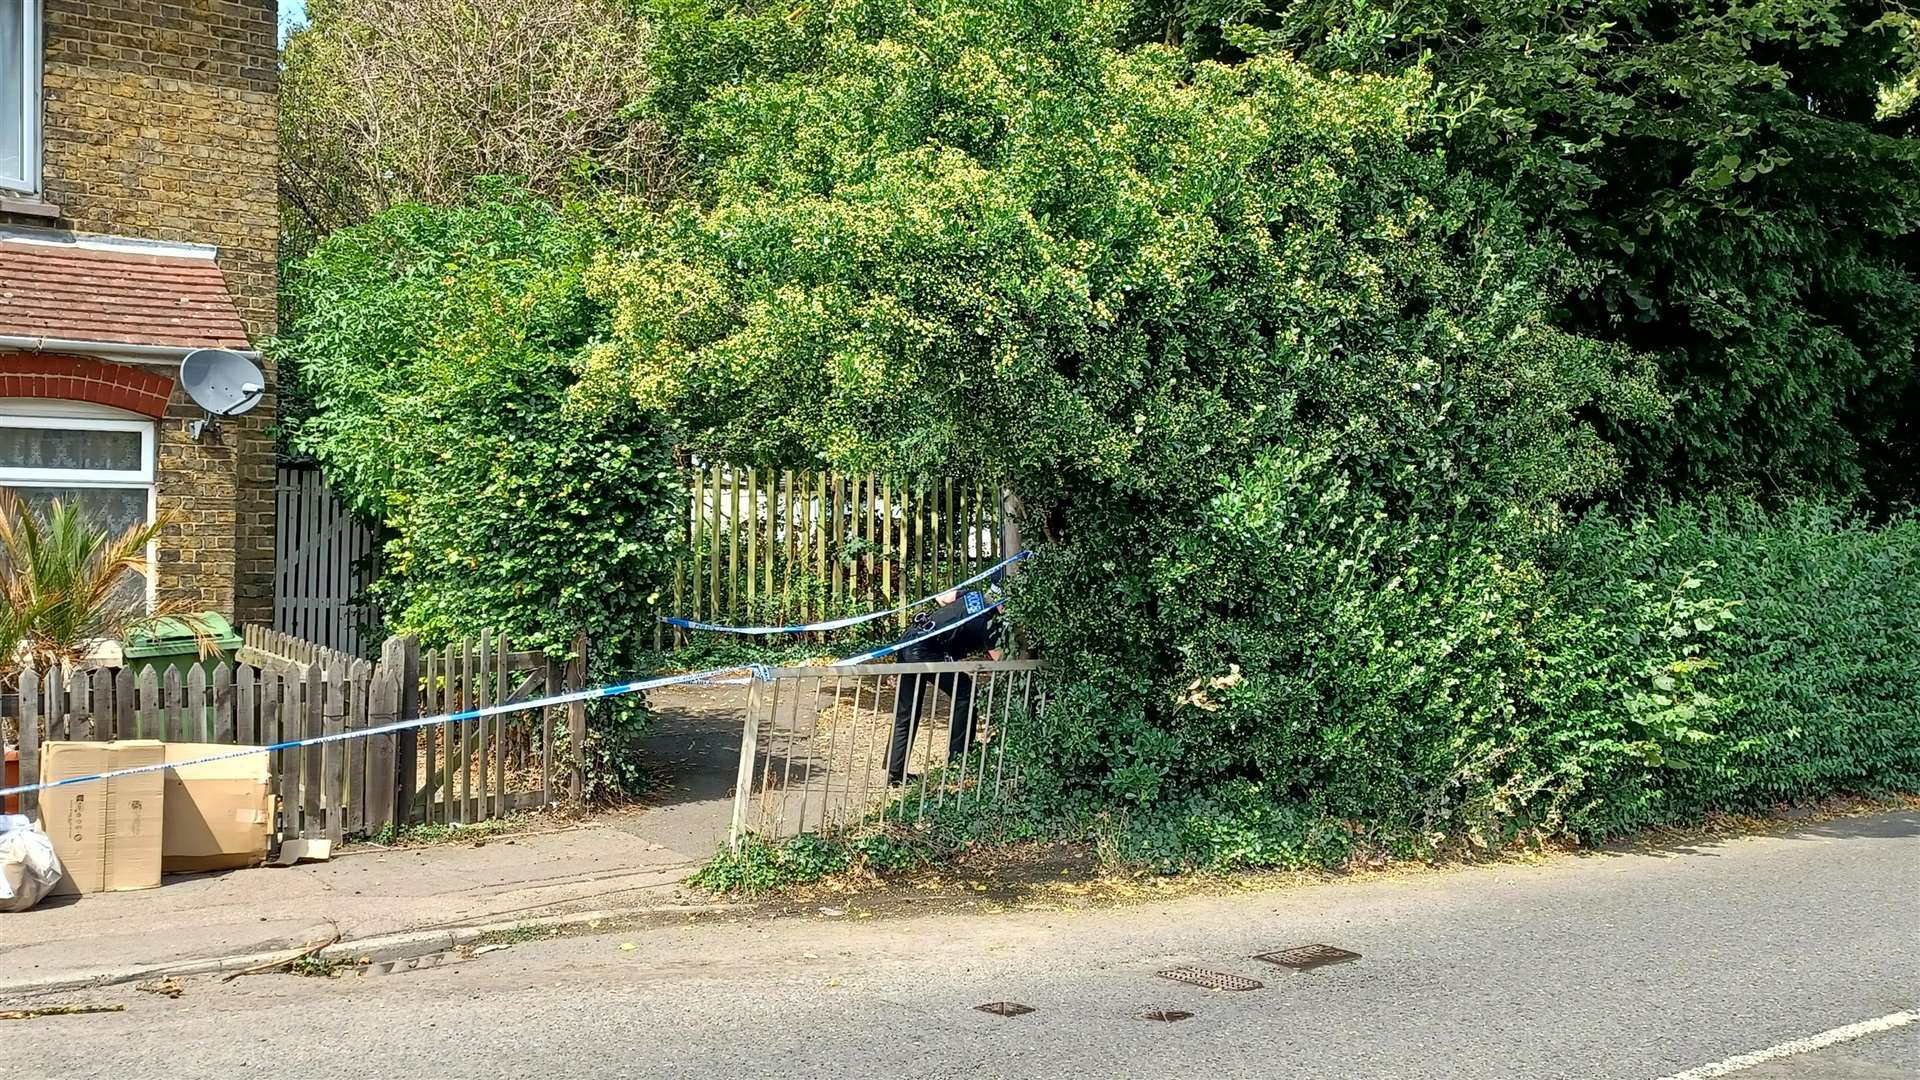 Officers were seen searching bushes in the area